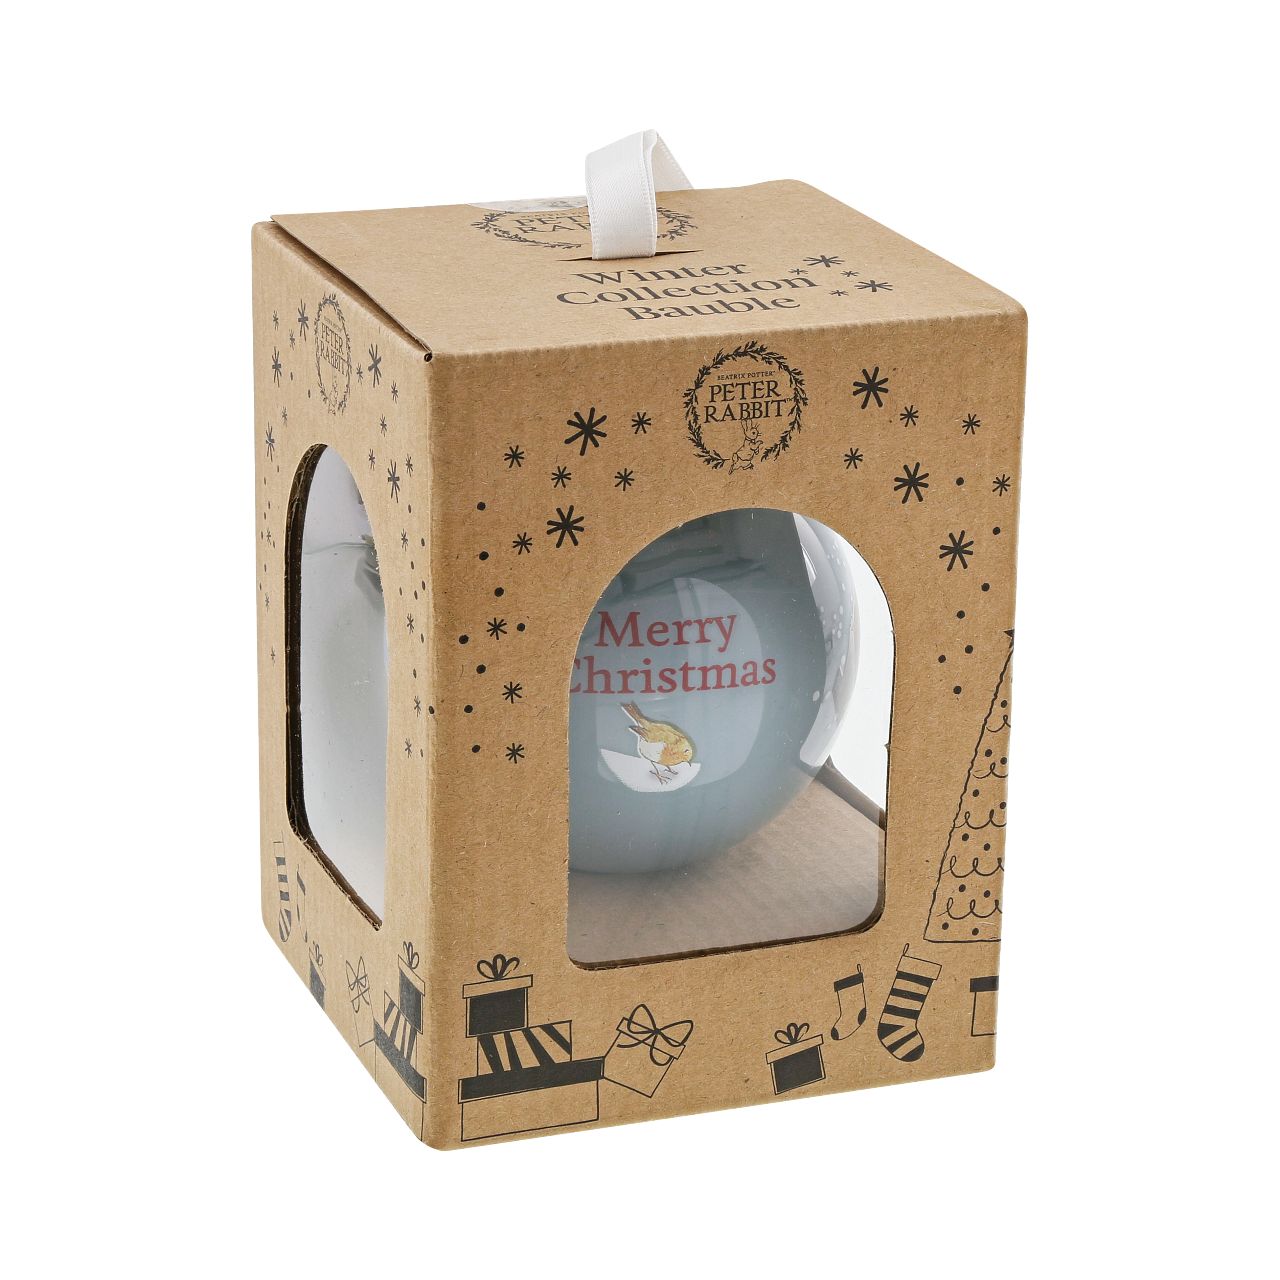 Peter & Benjamin's Fun in the Snow Bauble  Wish someone a very Merry Christmas with this Peter & Benjamin's Fun in the Snow Bauble. This bauble would make a treasured keepsake over the festive period, and would be take pride of place on the Christmas tree. Presented in a branded box.